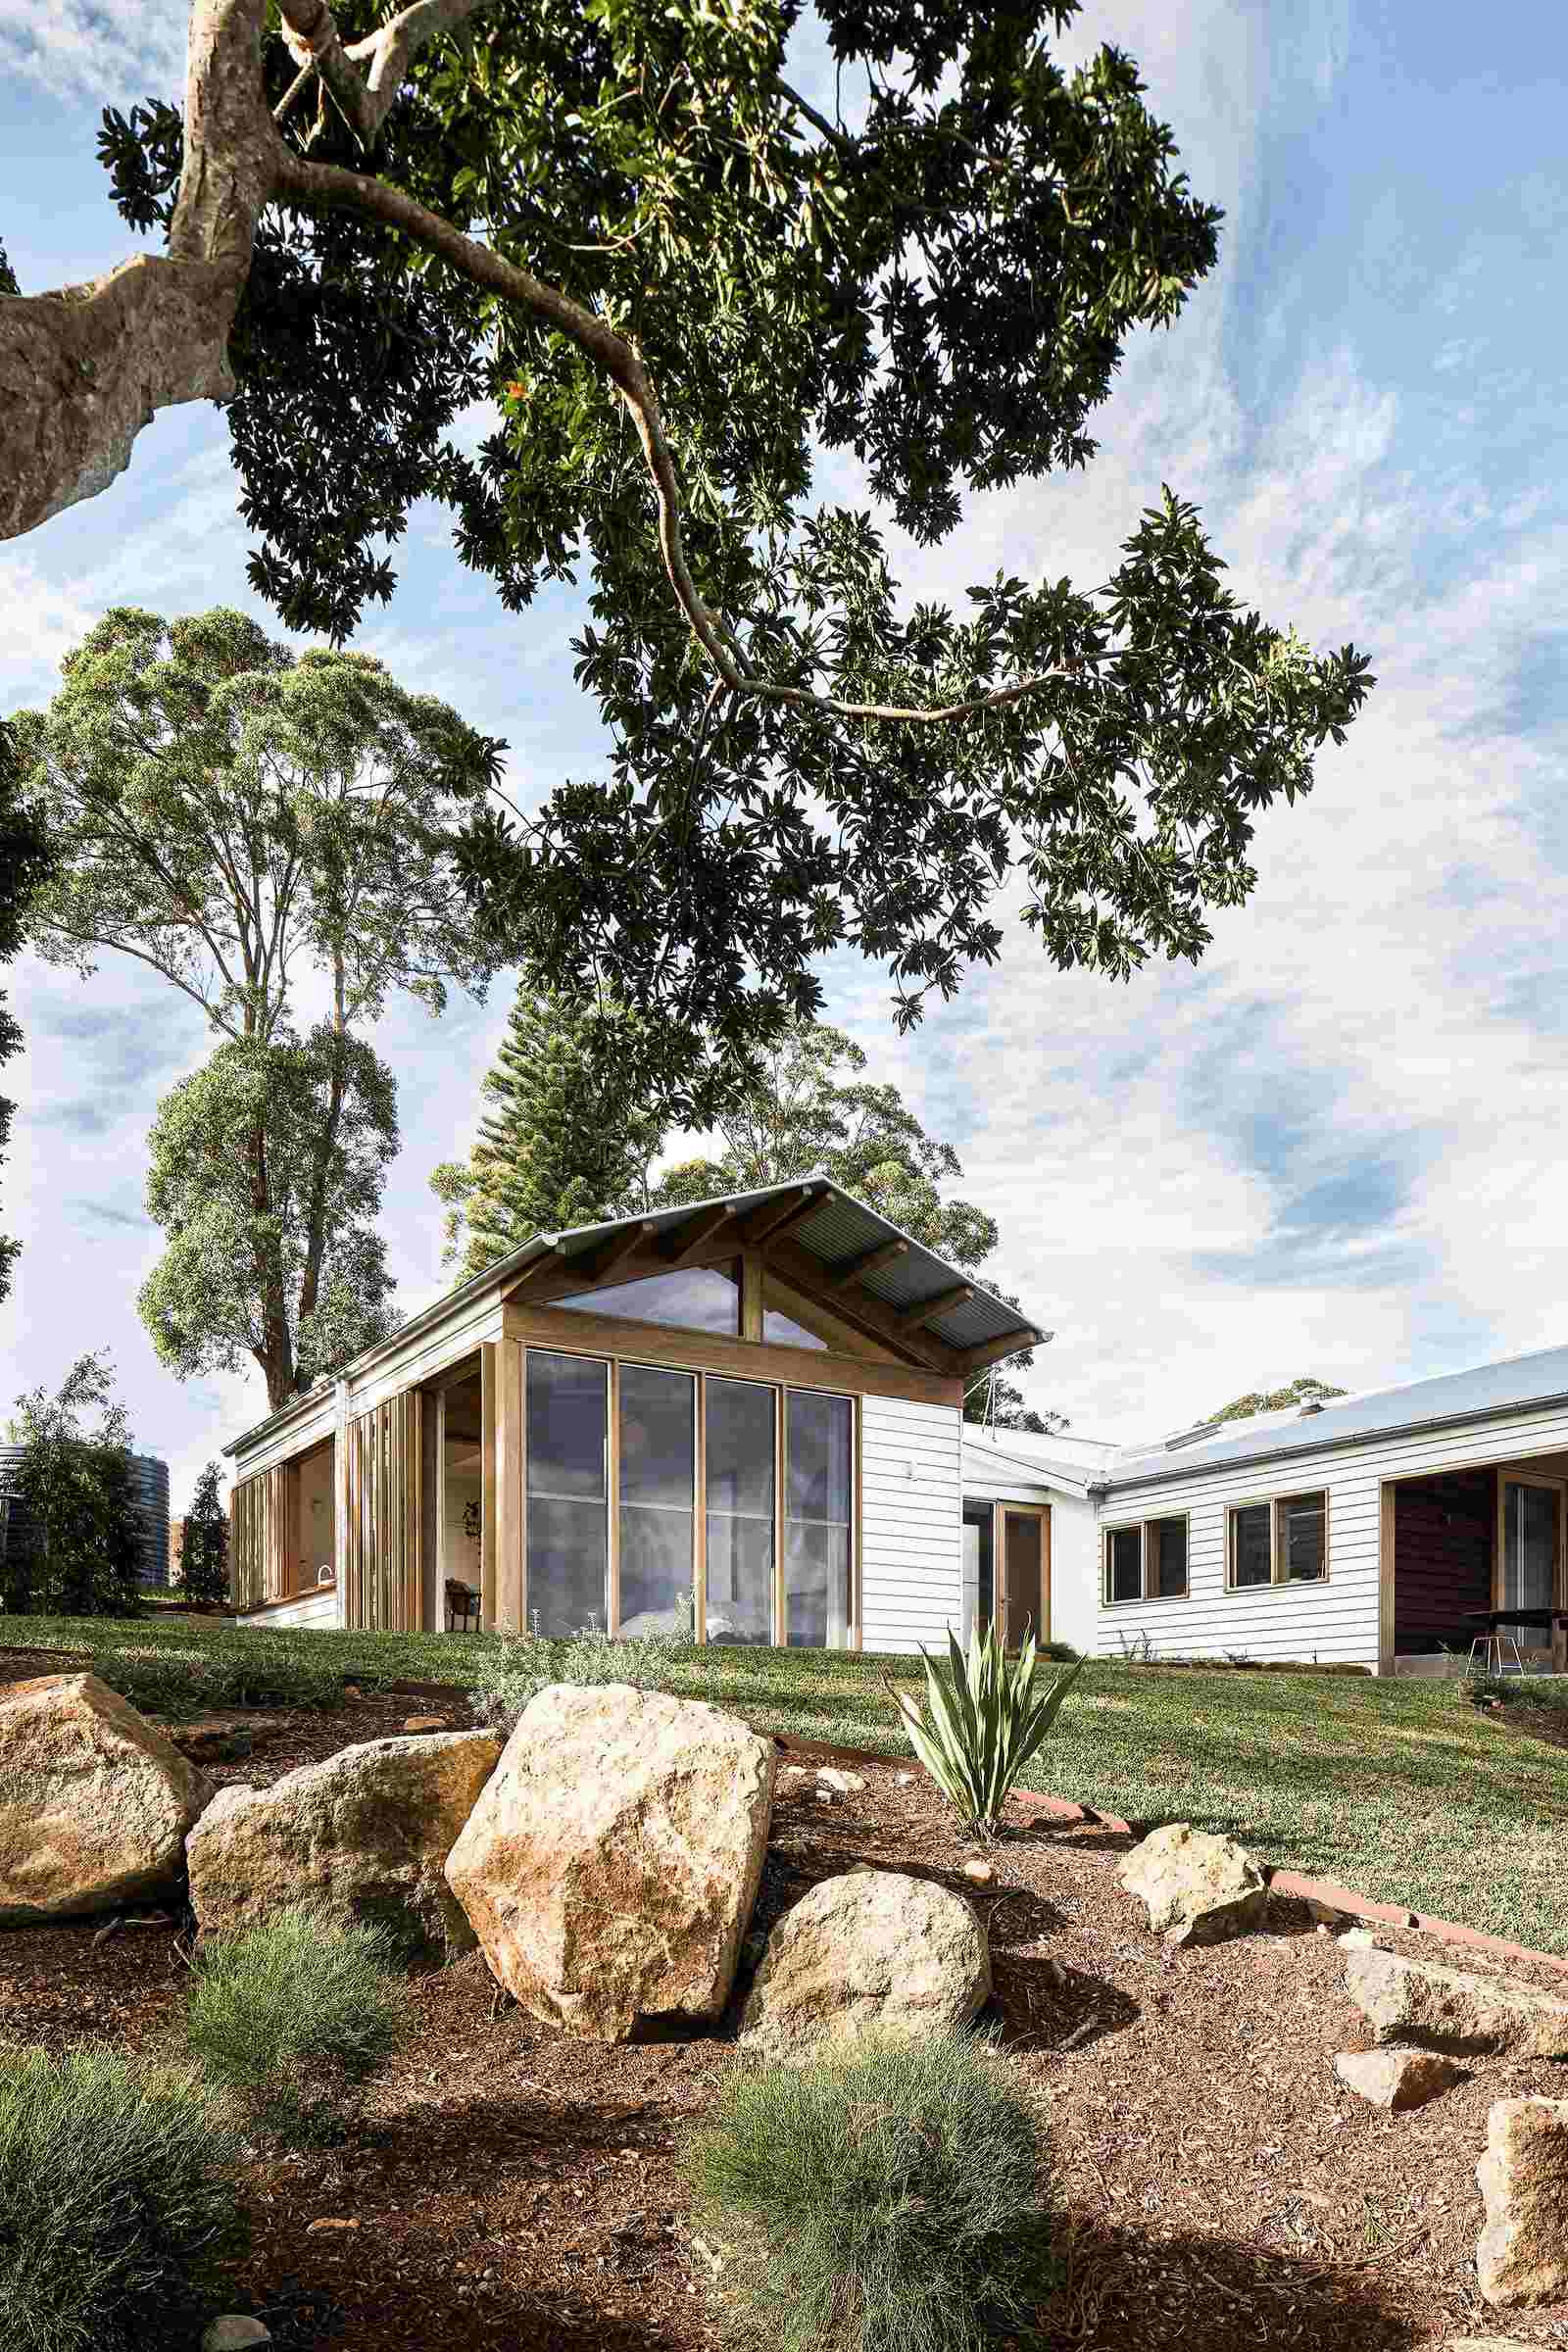 The Caretaker's by Aphora Architecture showing the landscaped garden of the house in Byron